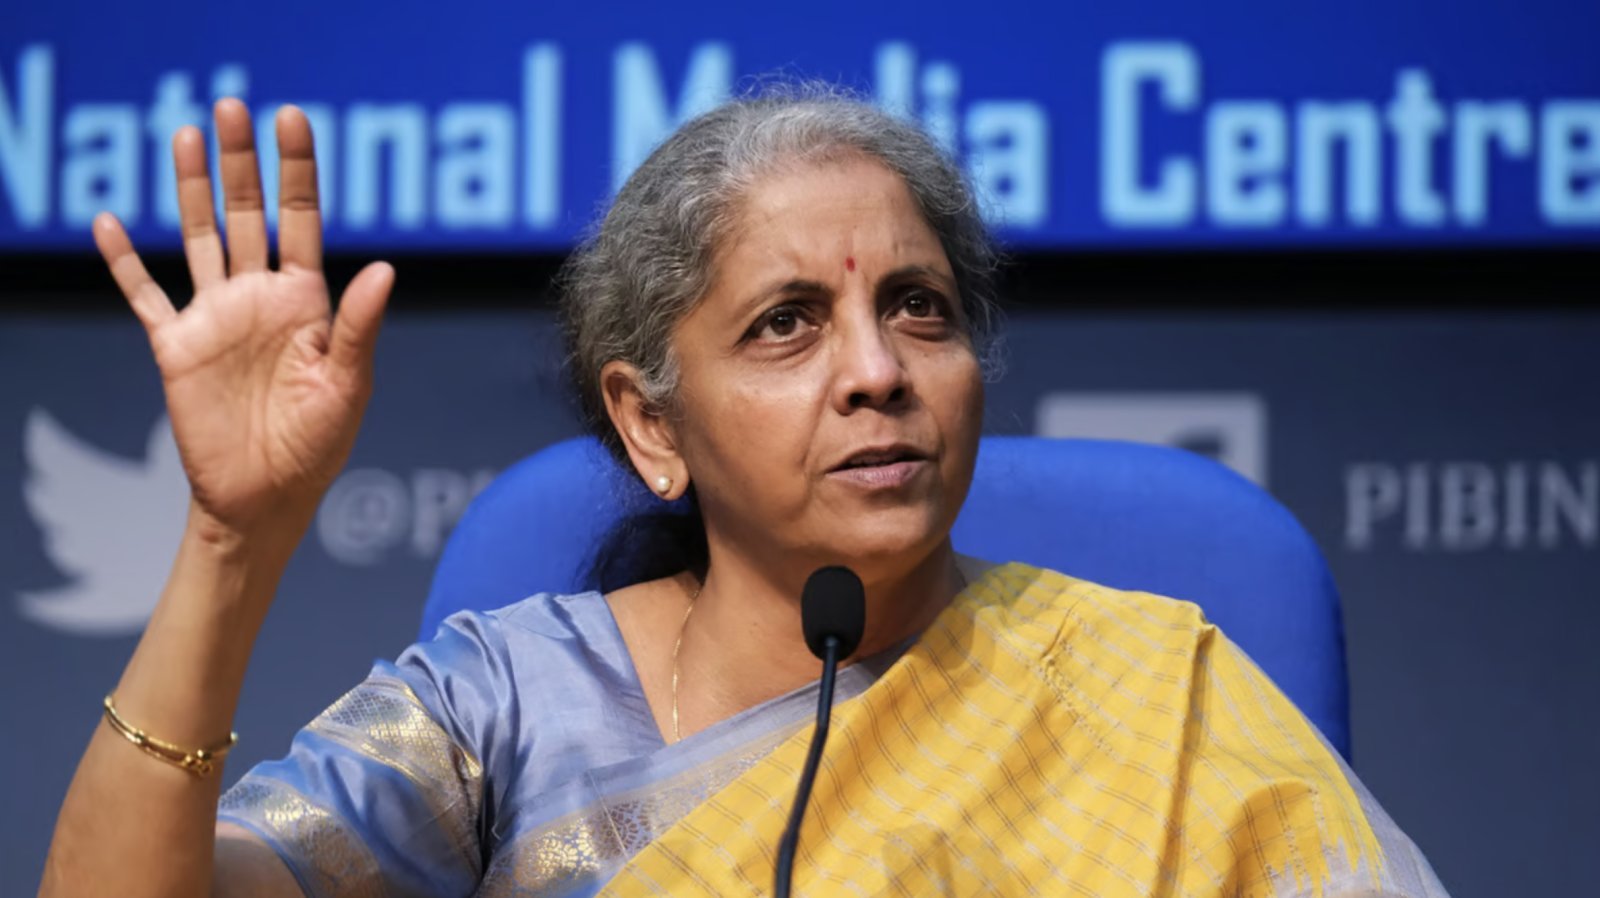 Average monthly GST collection in the current financial year reached Rs 1.66 lakh crore, Nirmala Sitharaman gave information